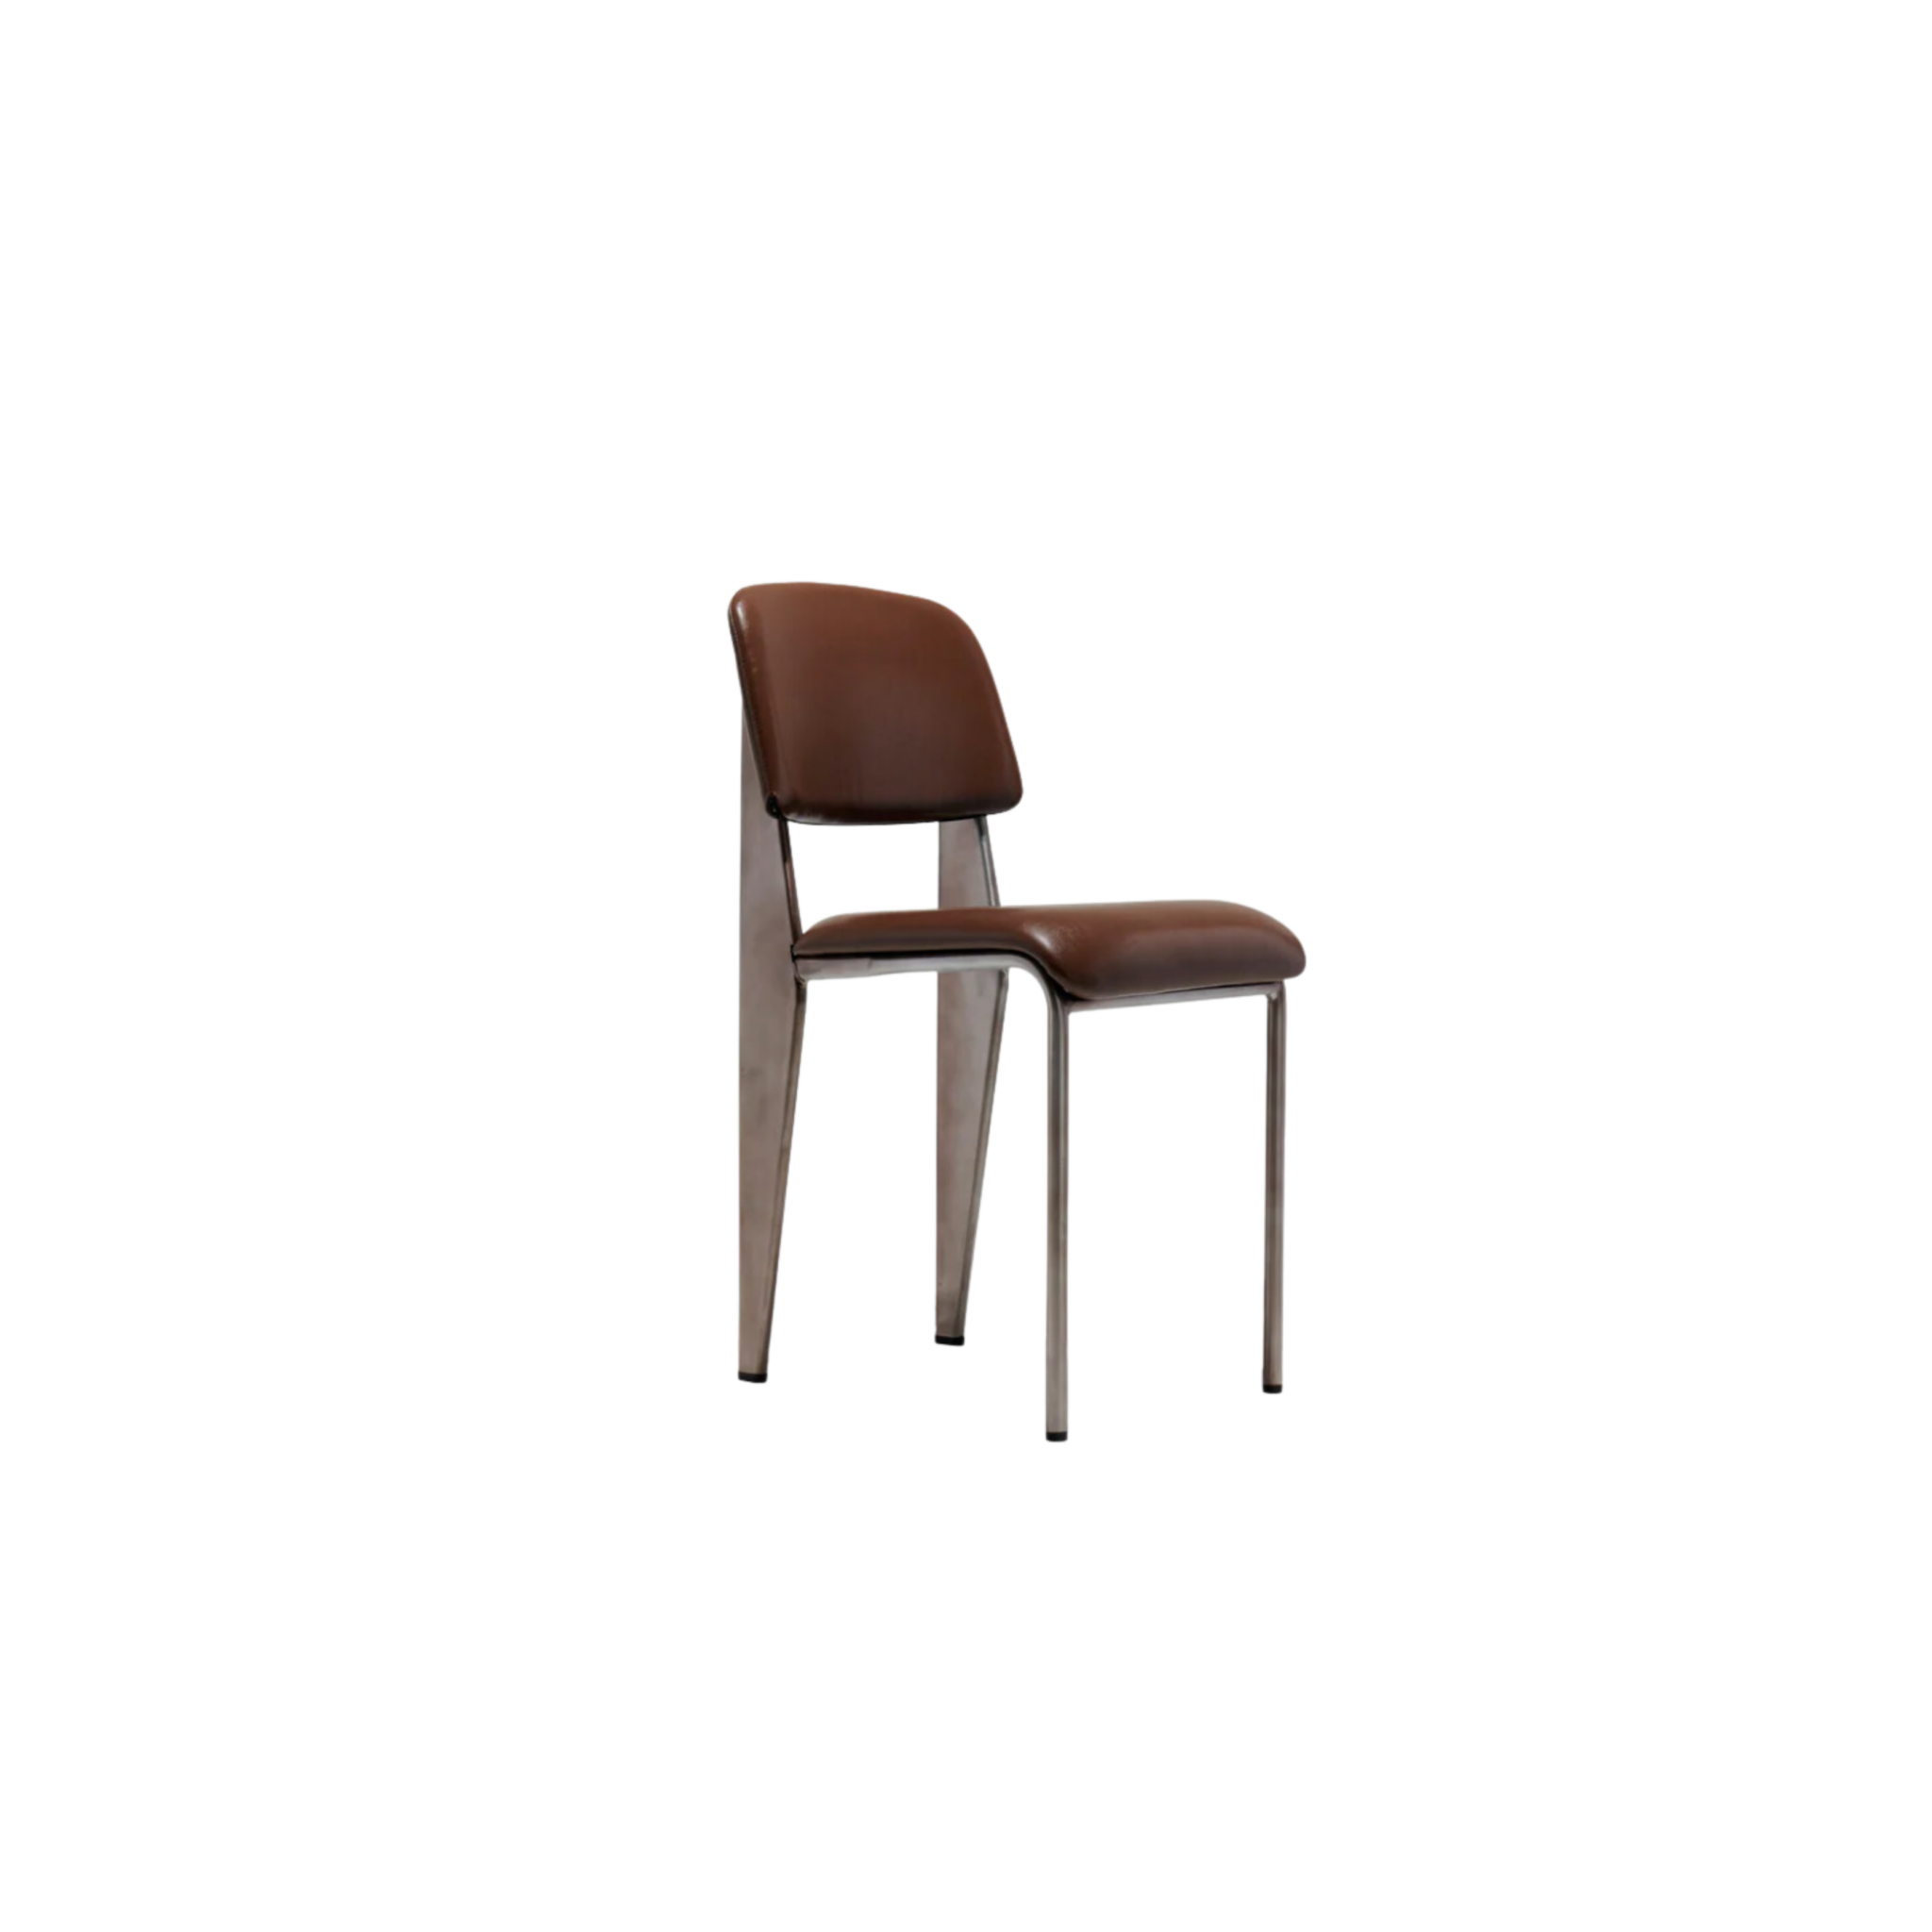 Wooden-brown-chair